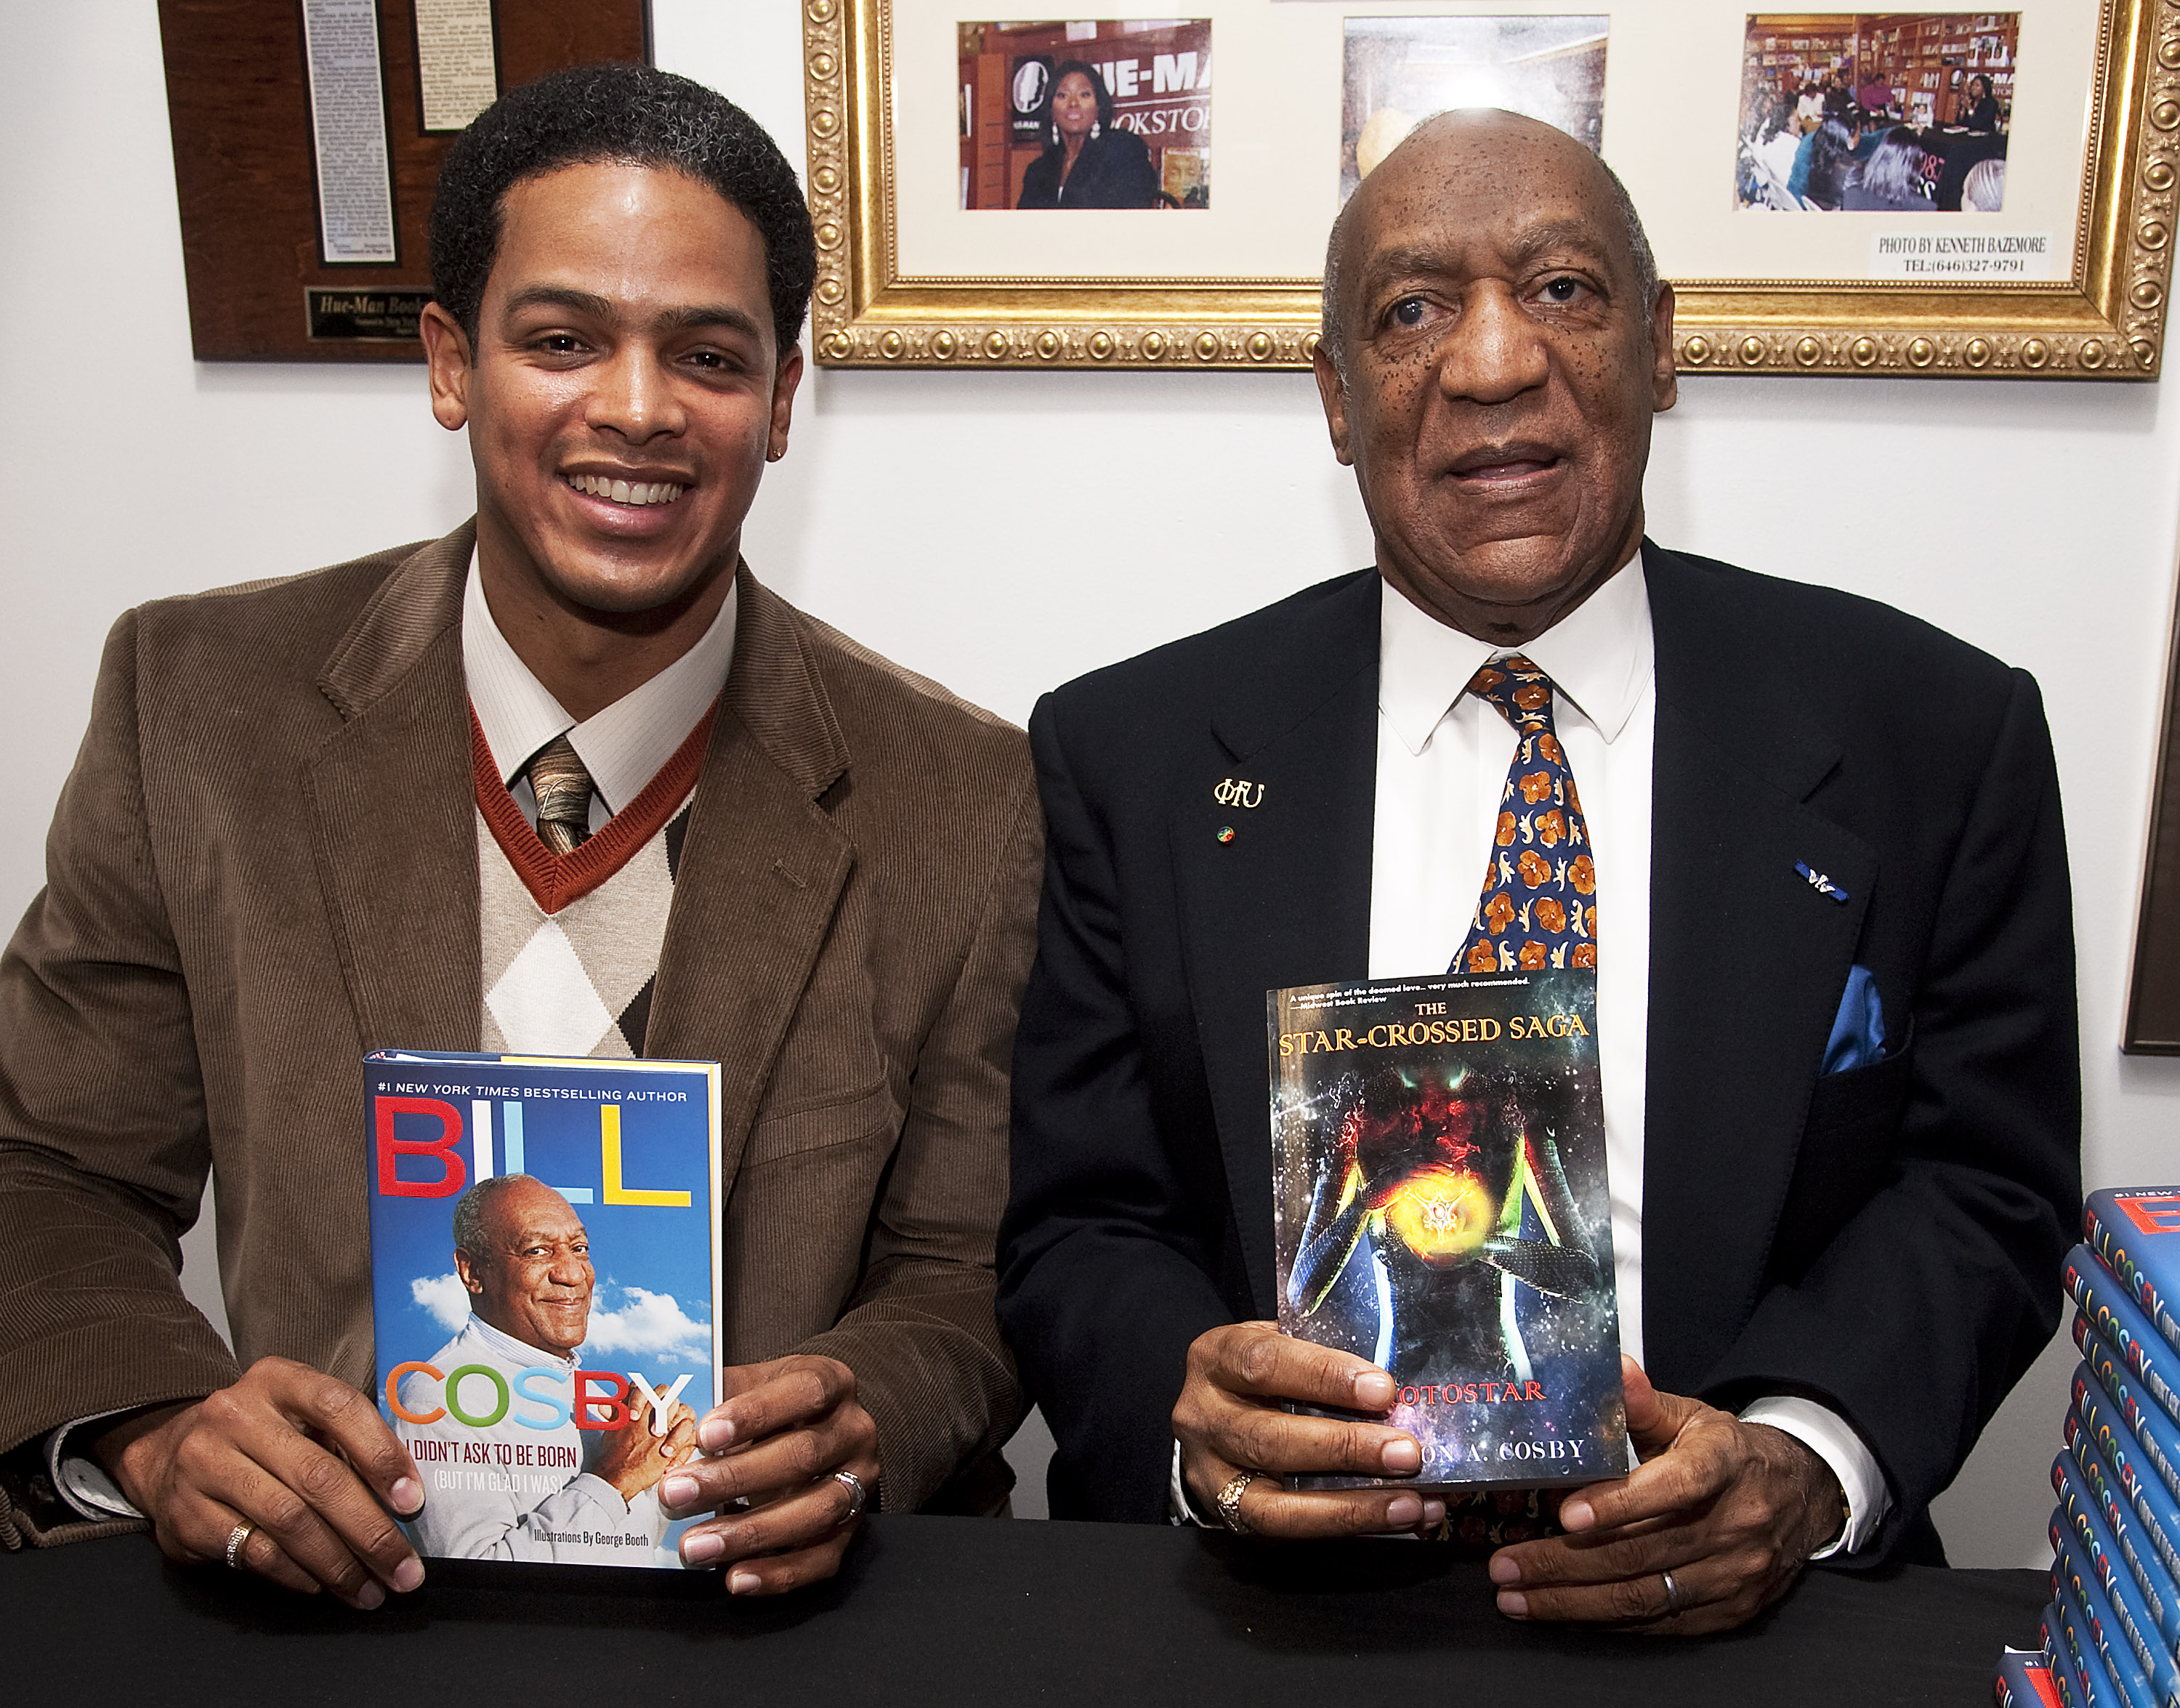 Braxton Cosby promotes his book <i>The Star-Crossed Saga Prostar</i> while his uncle Bill Cosby promotes <i>I Didn't Ask to Be Born (but I'm Glad I Was)</i> in New York City on Jan. 18, 2012 (Debra L Rothenberg—FilmMagic/Getty Images)